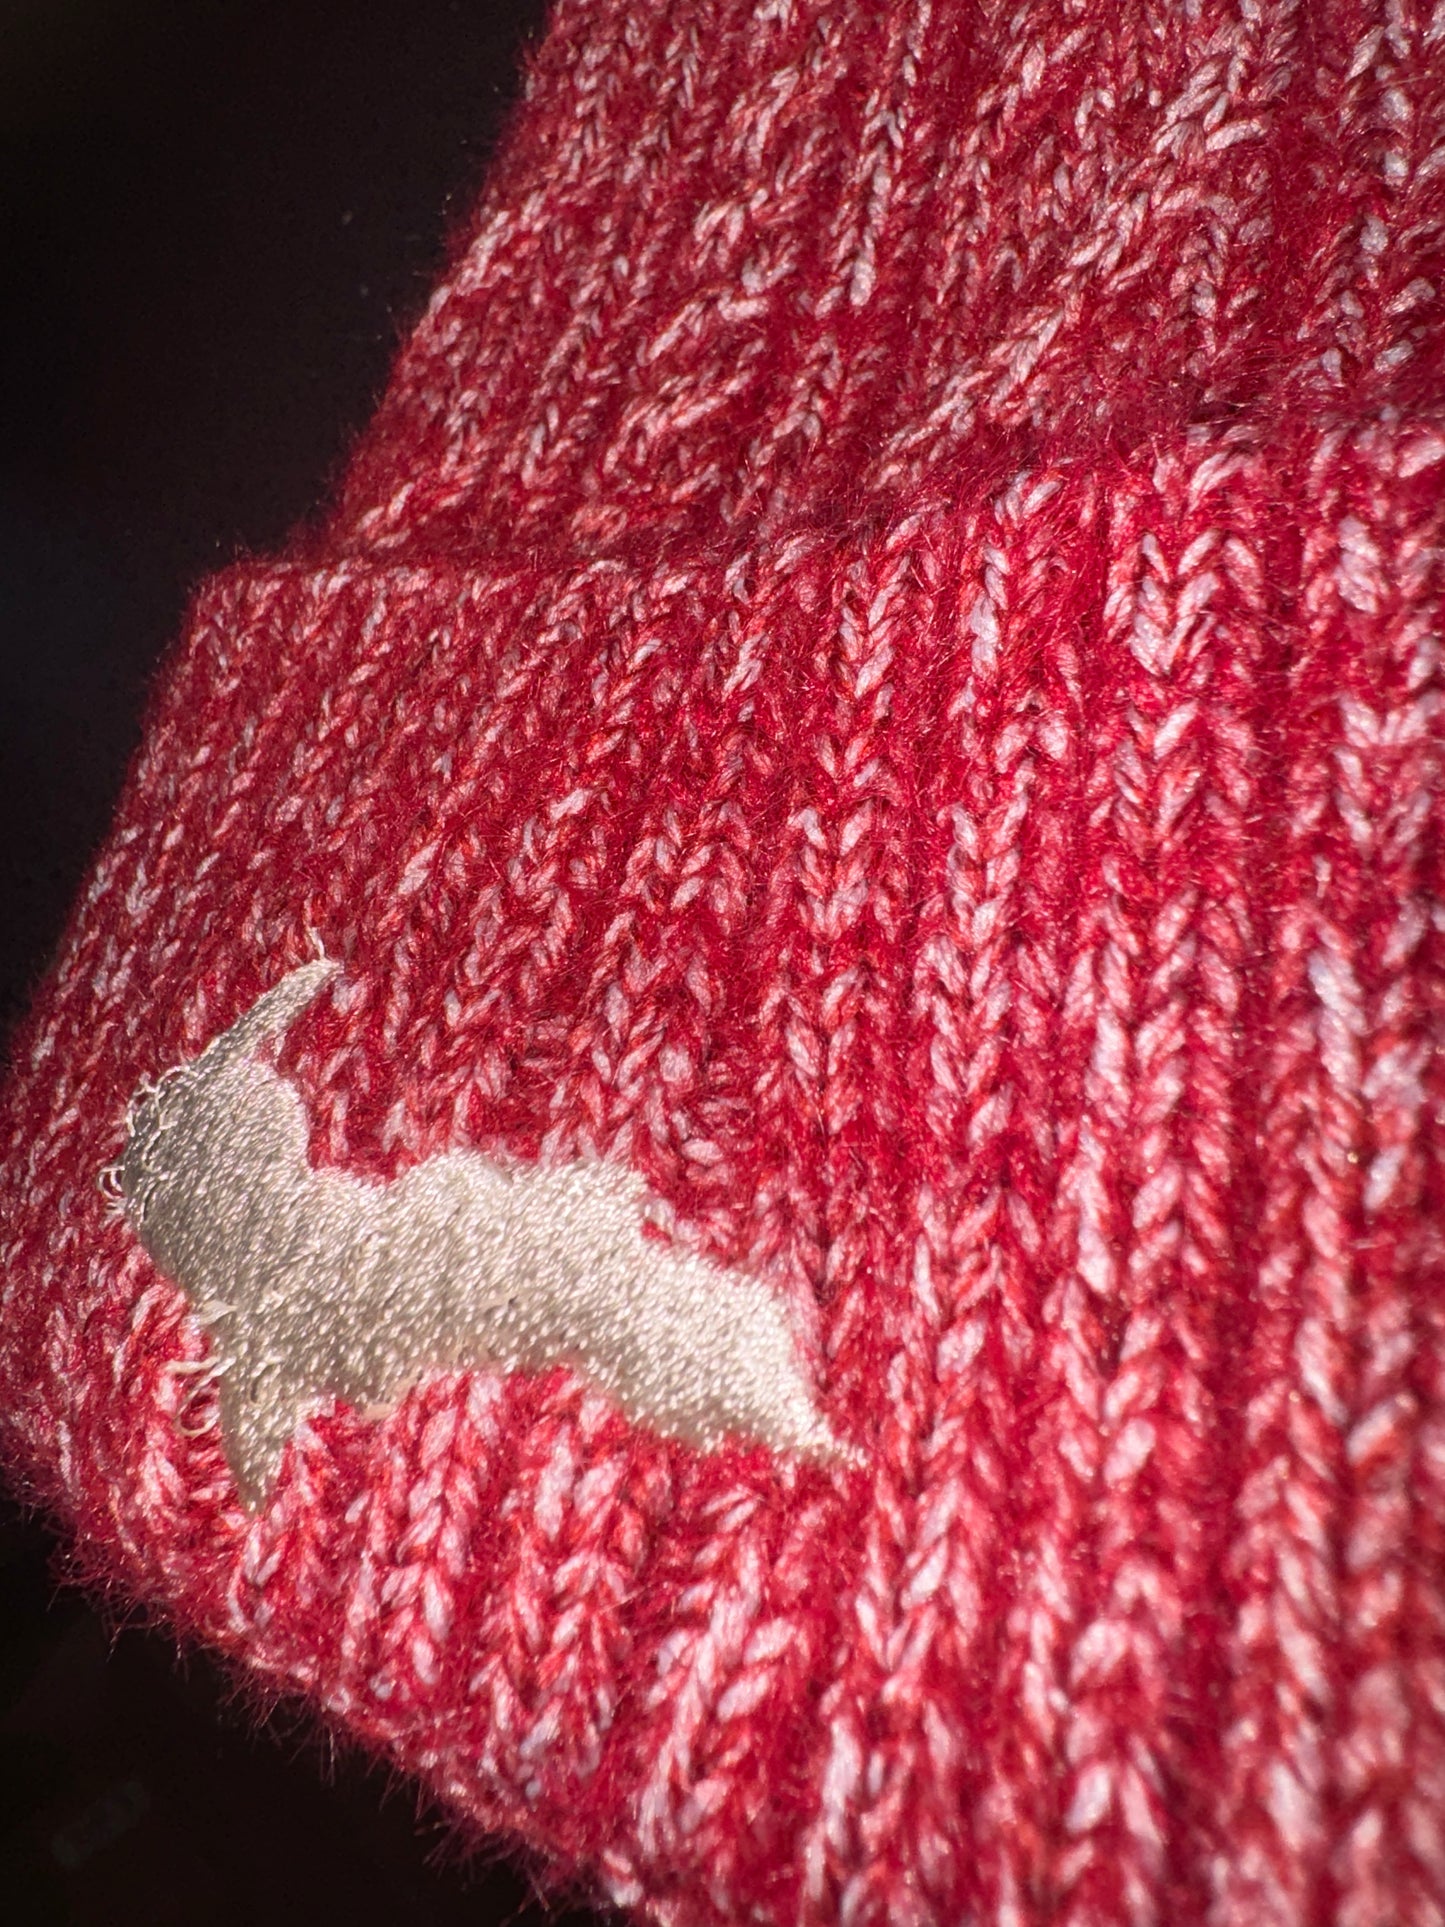 Verigated Beige & Red Knit Hat with Faux Pom